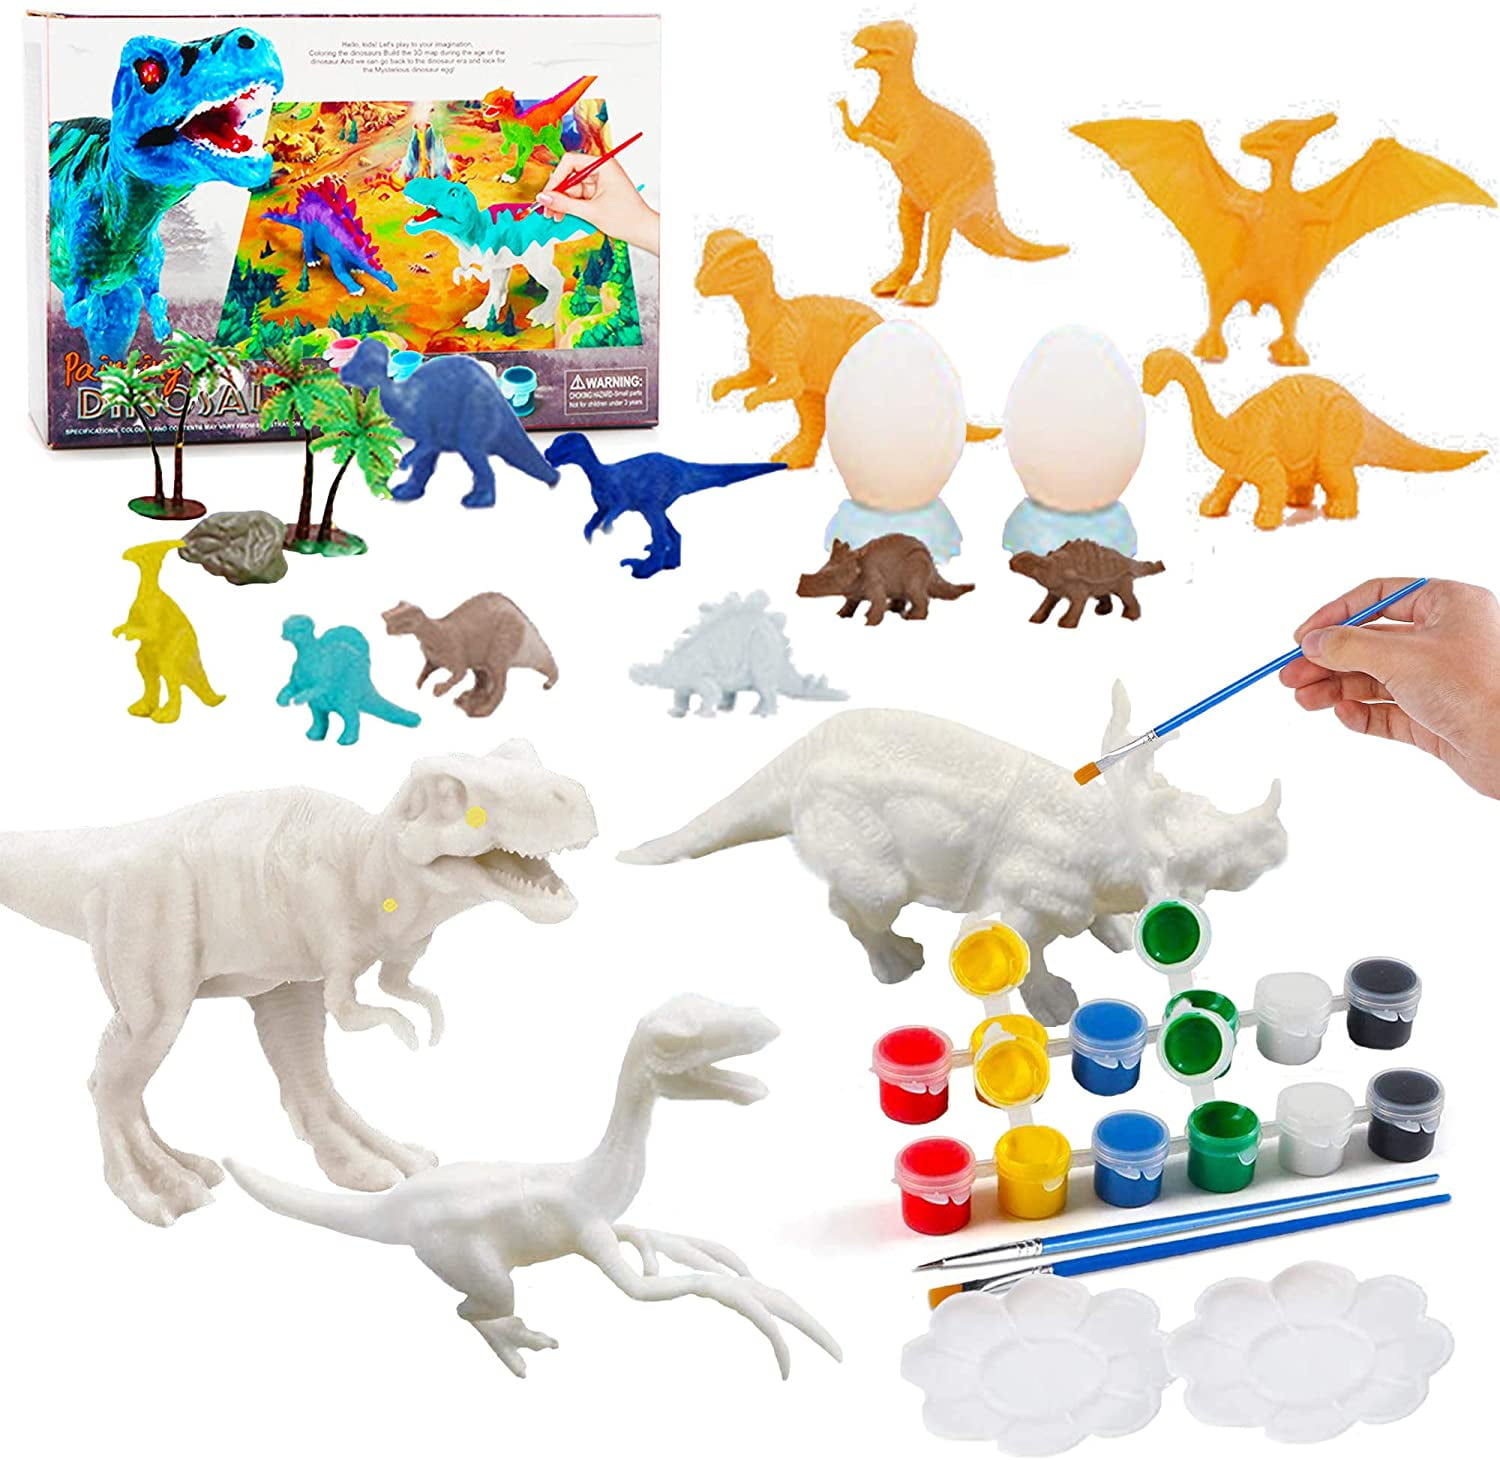 Yileqi DIY Animals Painting Kits for Kids Crafts and Arts Supplies Party Favors for Girls Boys Age 4 5 6 7 8 9 10 Years Old Includes 6 Different Animals Creativity Easter Gift Paint Your Own Set